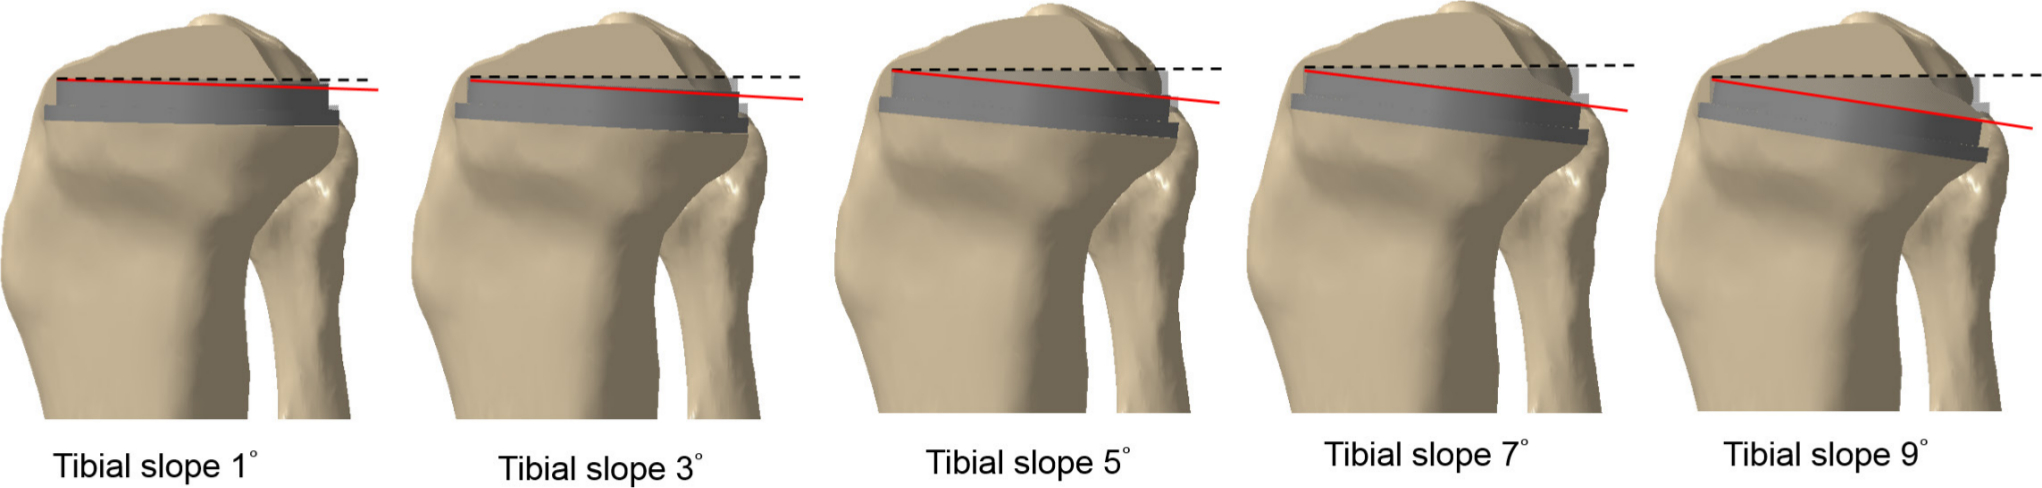 Fig. 2 
            Depiction of the posterior tibial slope of 1°, 3°, 5°, 7°, and 9°.
          